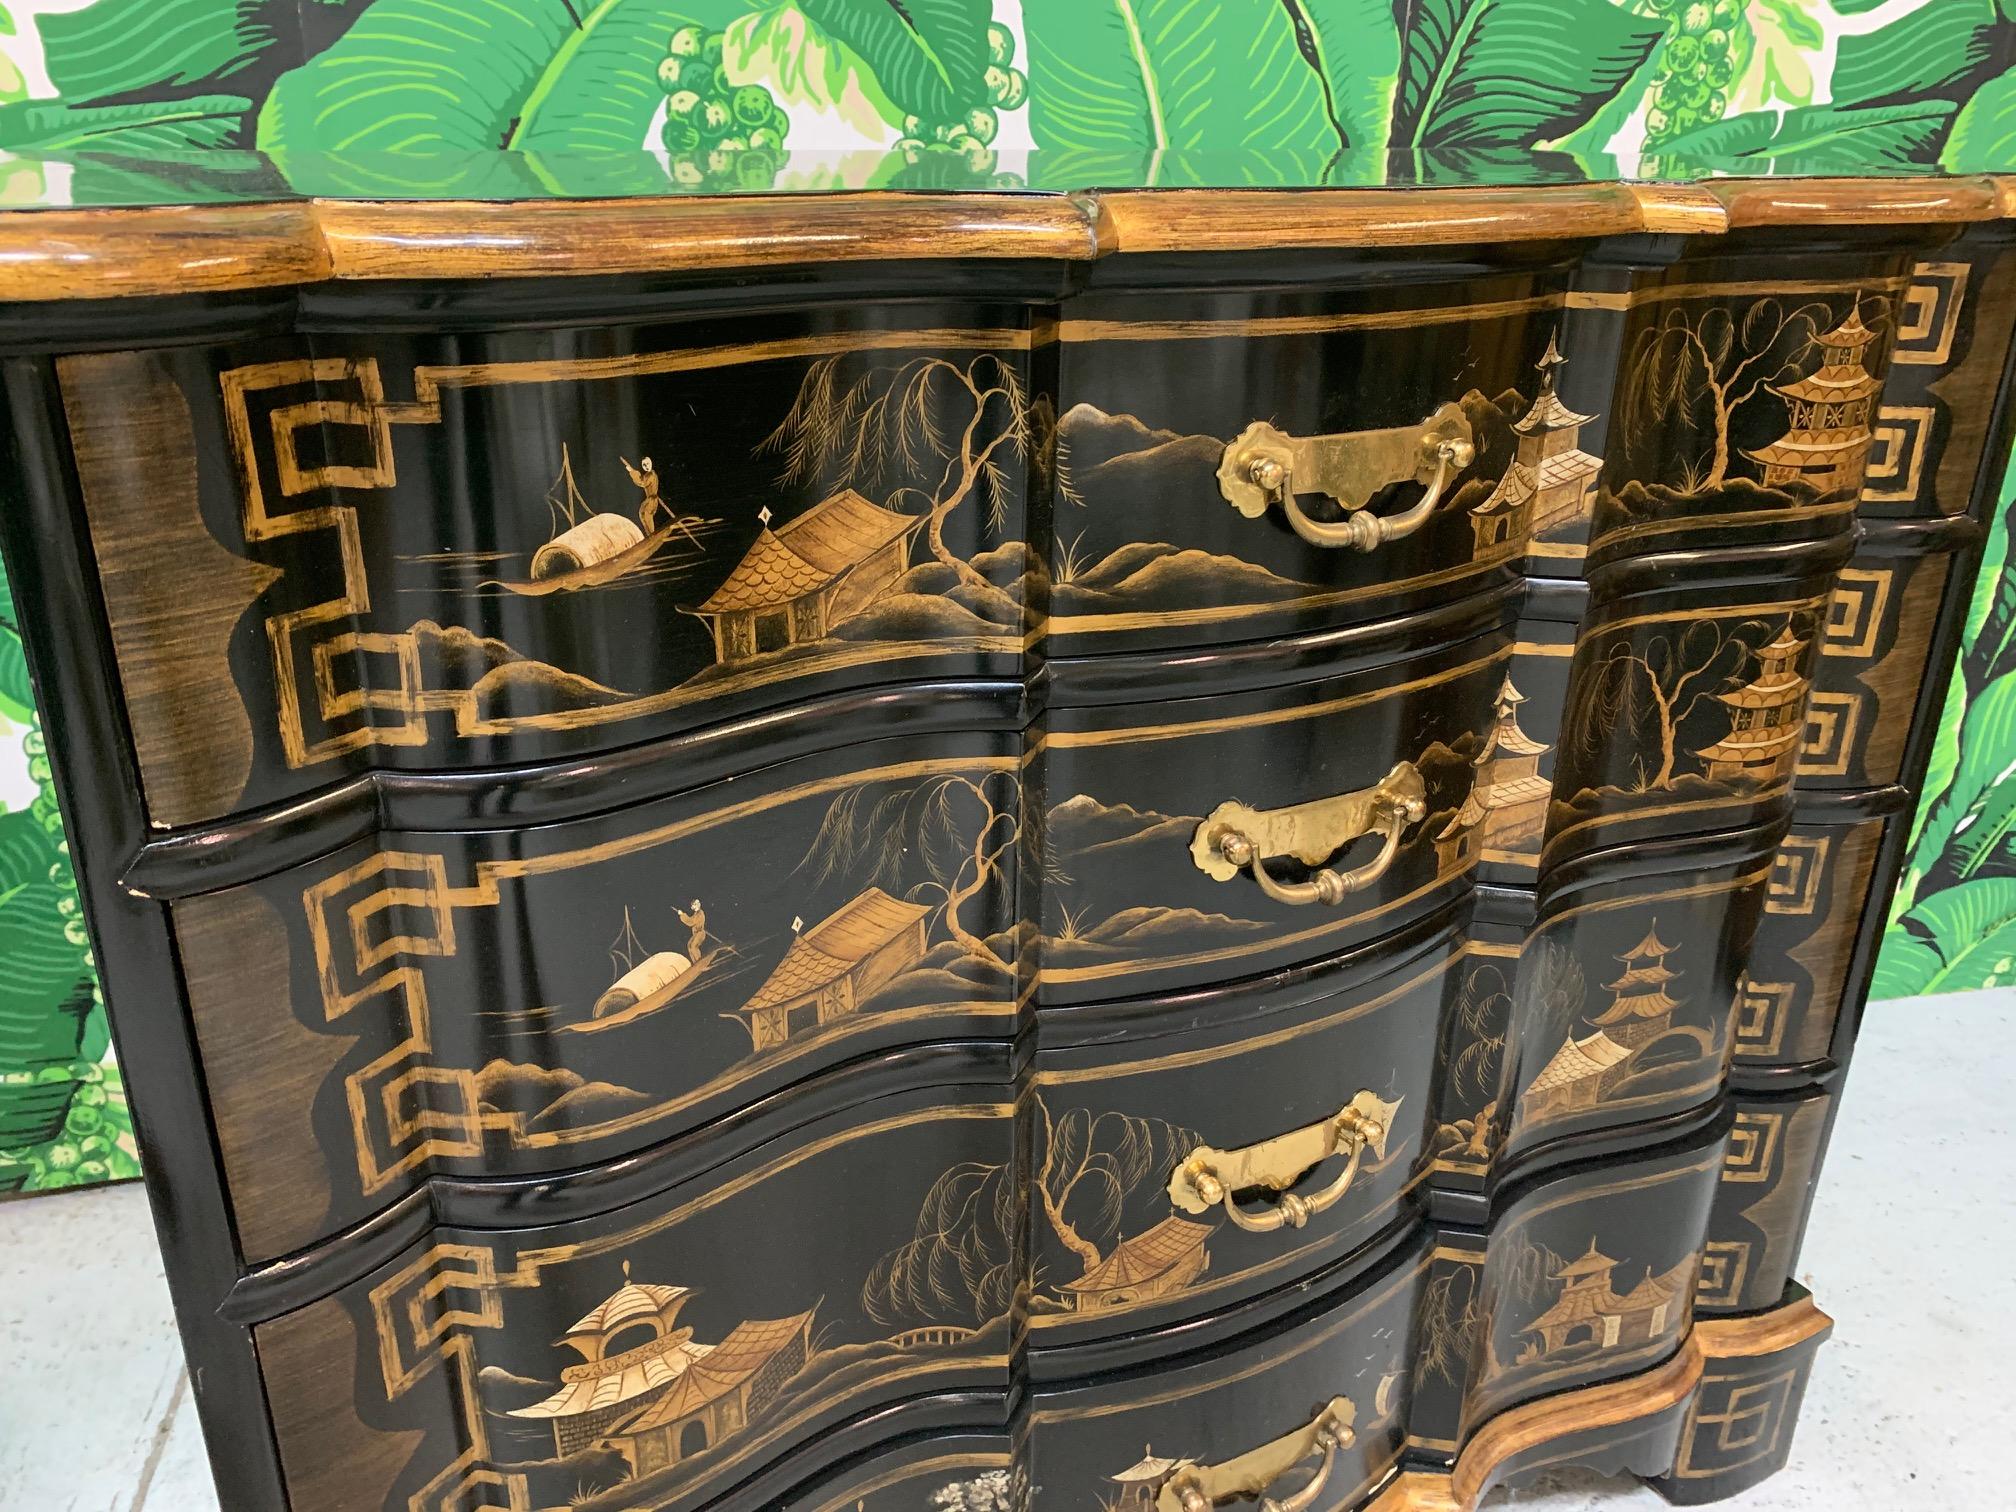 Pair of dressers by Baker Furniture in Chinoiserie style, perfect for any Asian or Hollywood Regency decor. Part of the Collector's Edition series, these Dutch chests reflect the influence of both English and French styles with their pronounced